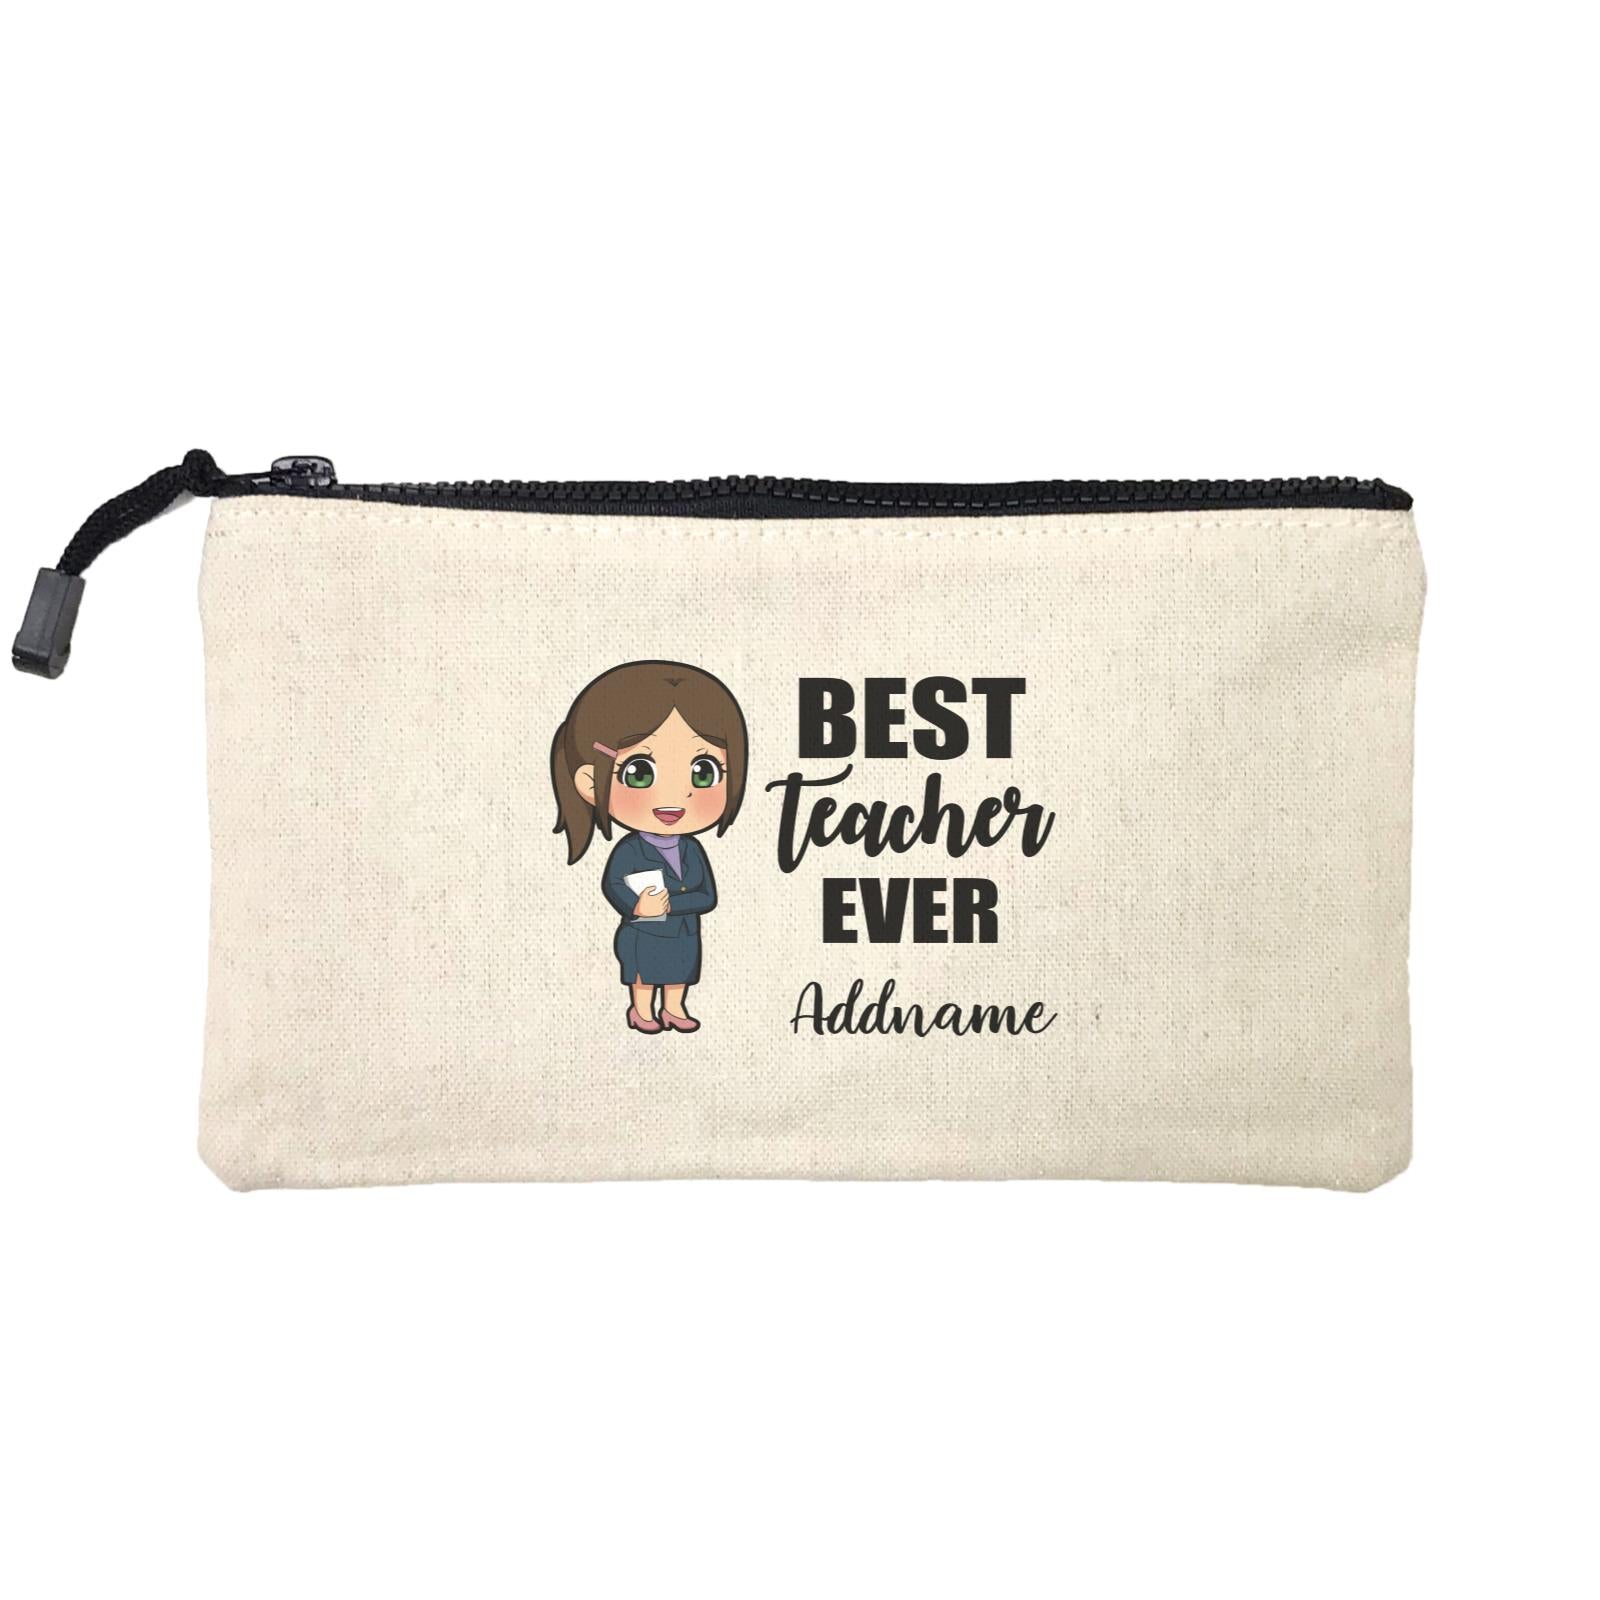 Chibi Teachers Chinese Woman Best Teacher Ever Addname Mini Accessories Stationery Pouch